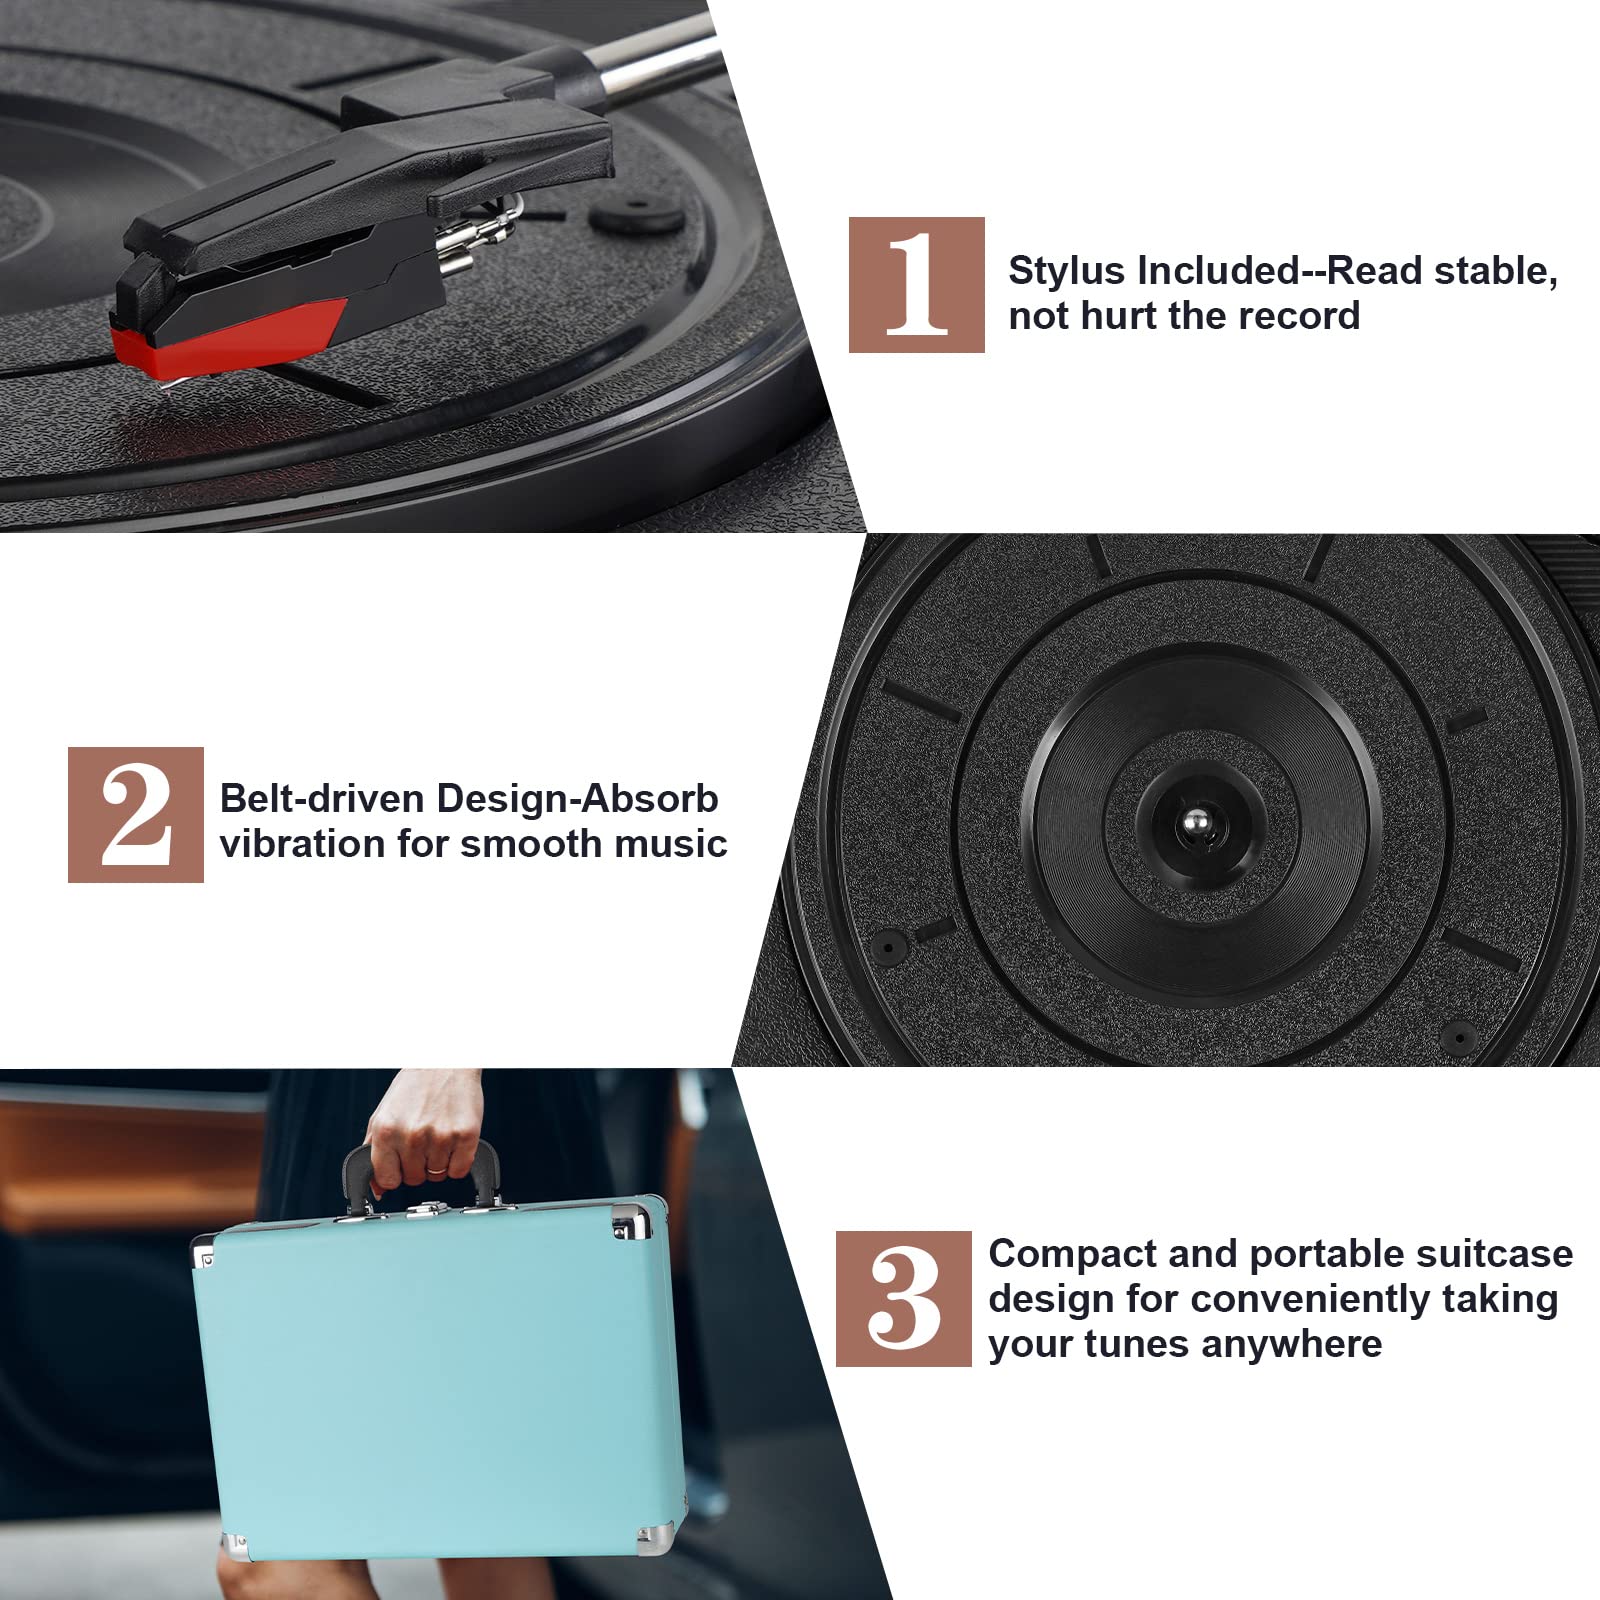 Vinyl Record Player, 3 Speeds Belt Driven Suitcase Portable Turntable for Vinyl Records with Built-in Speakers/RCA Output/Aux in/Headphone Jack/ 45 Adapter Black